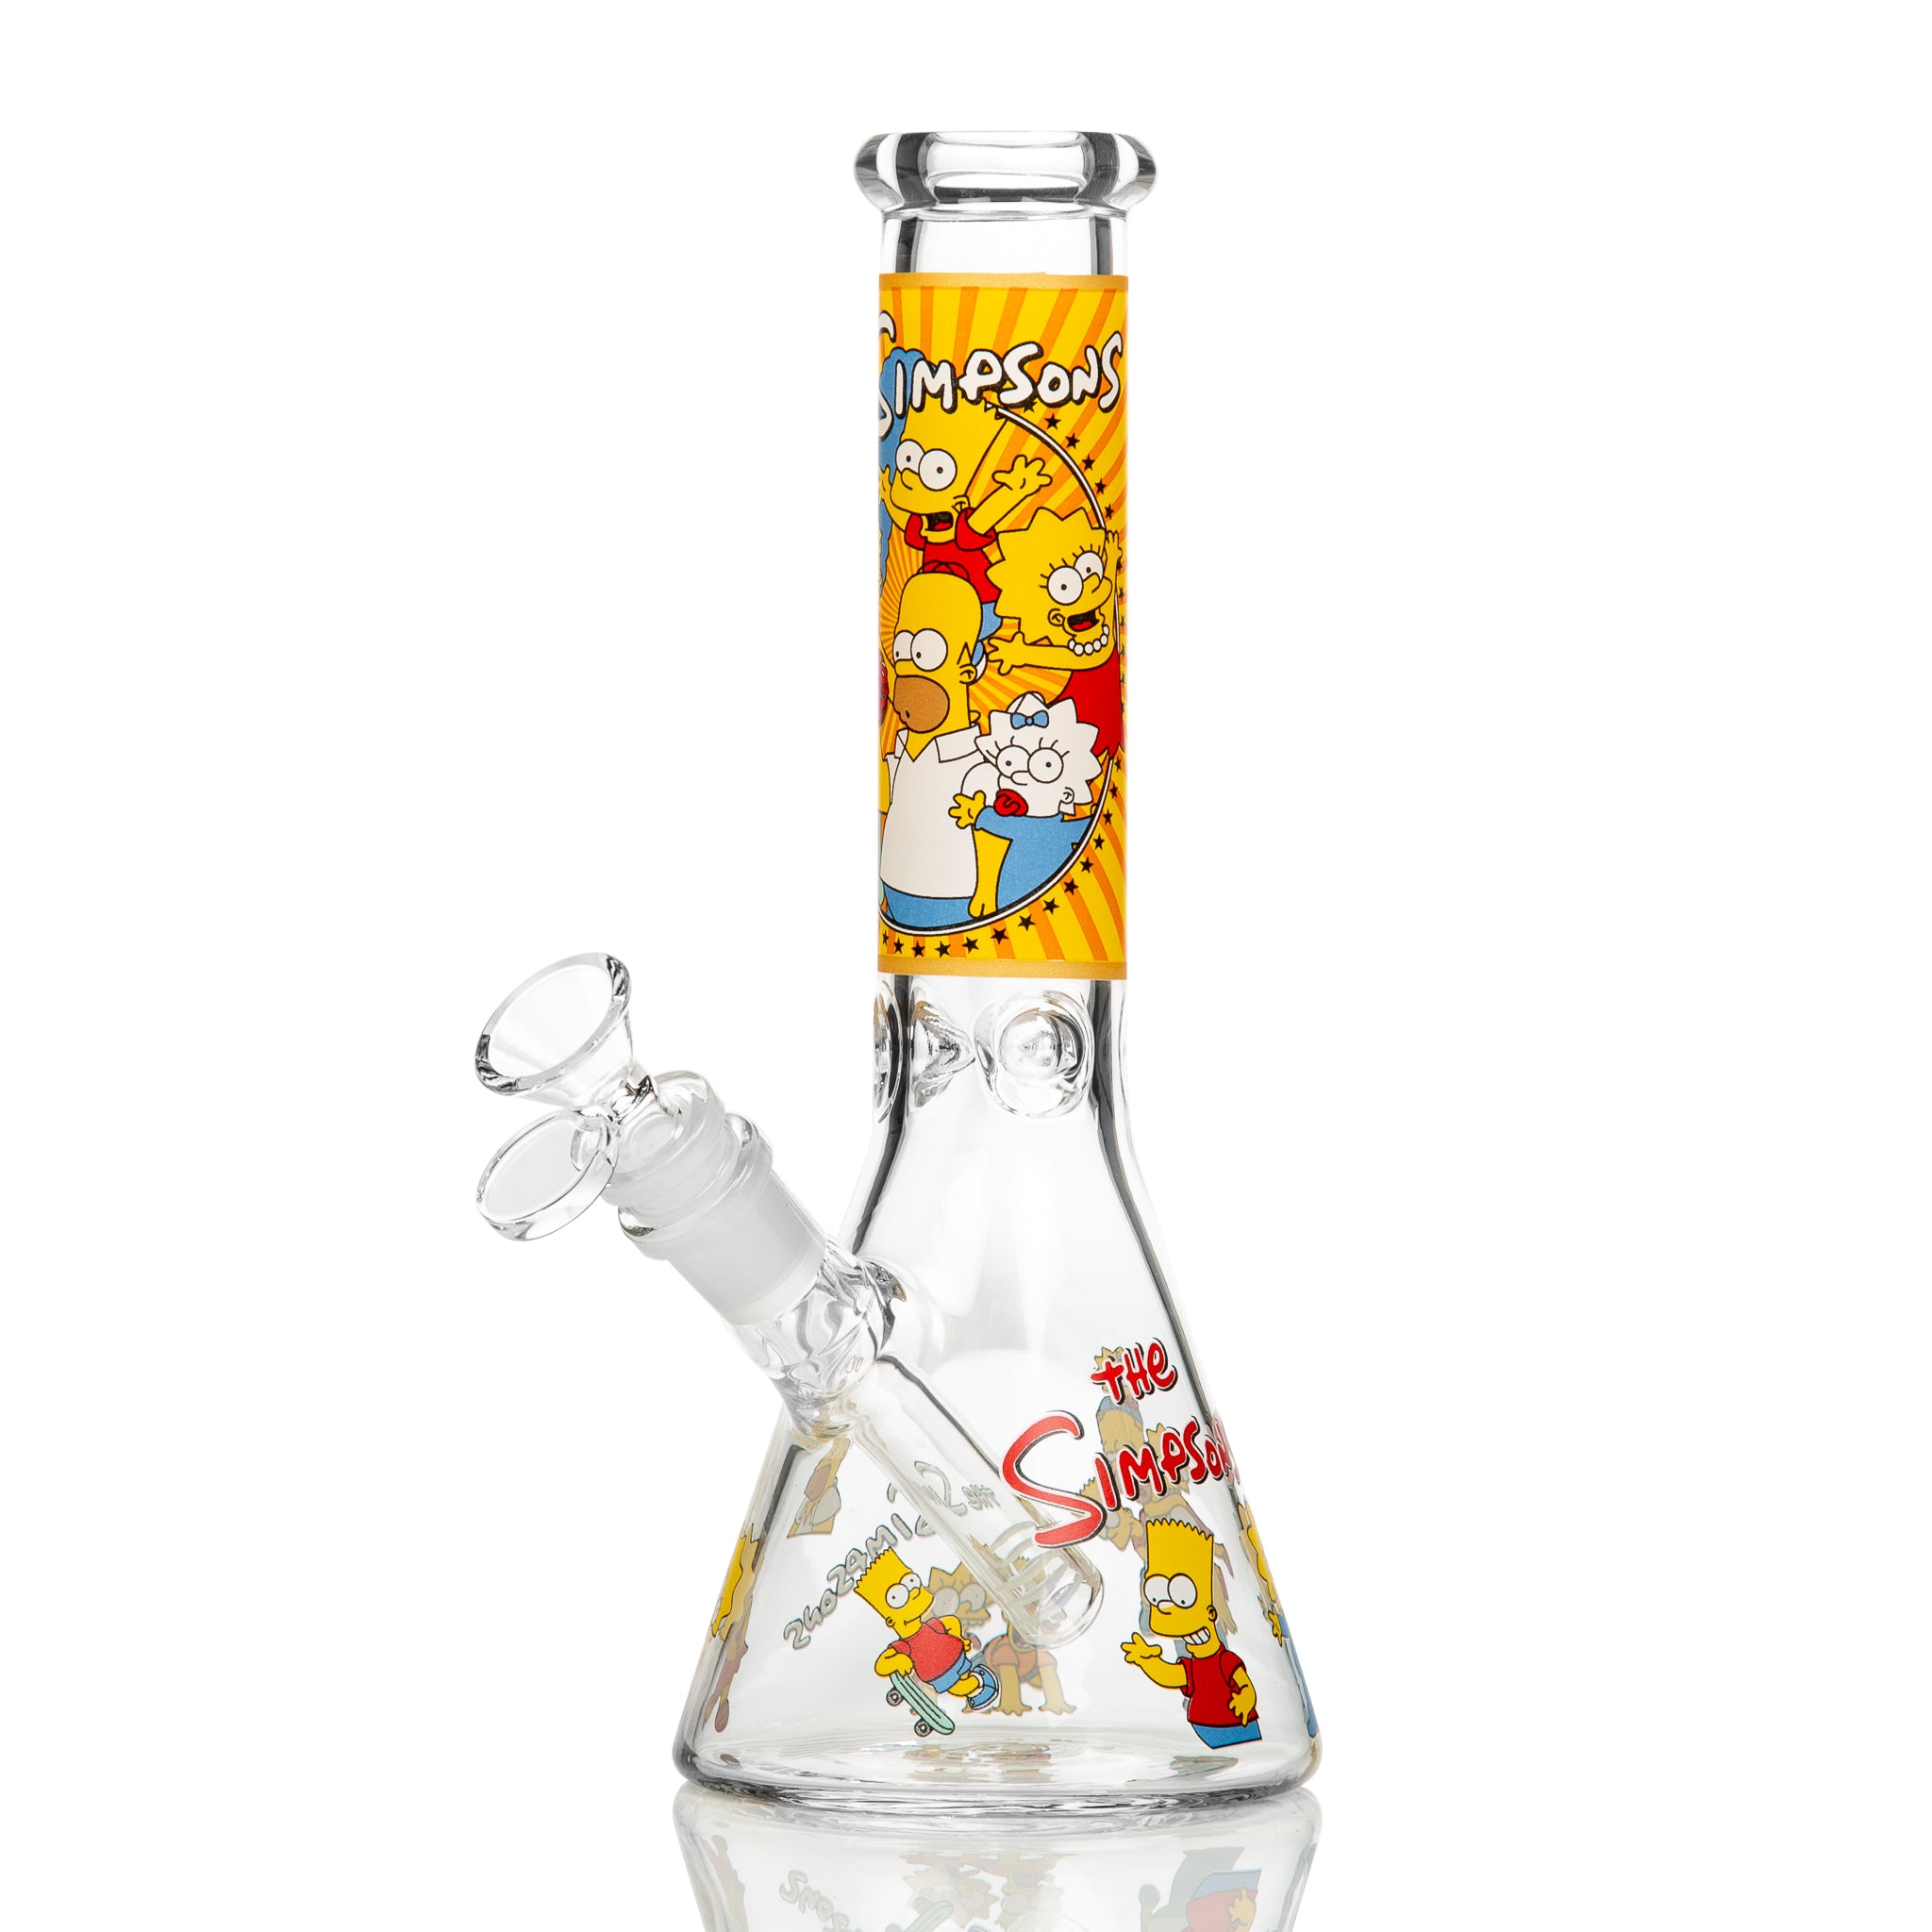 Cheap bong in glass beaker style and featuring simpsons decals. 